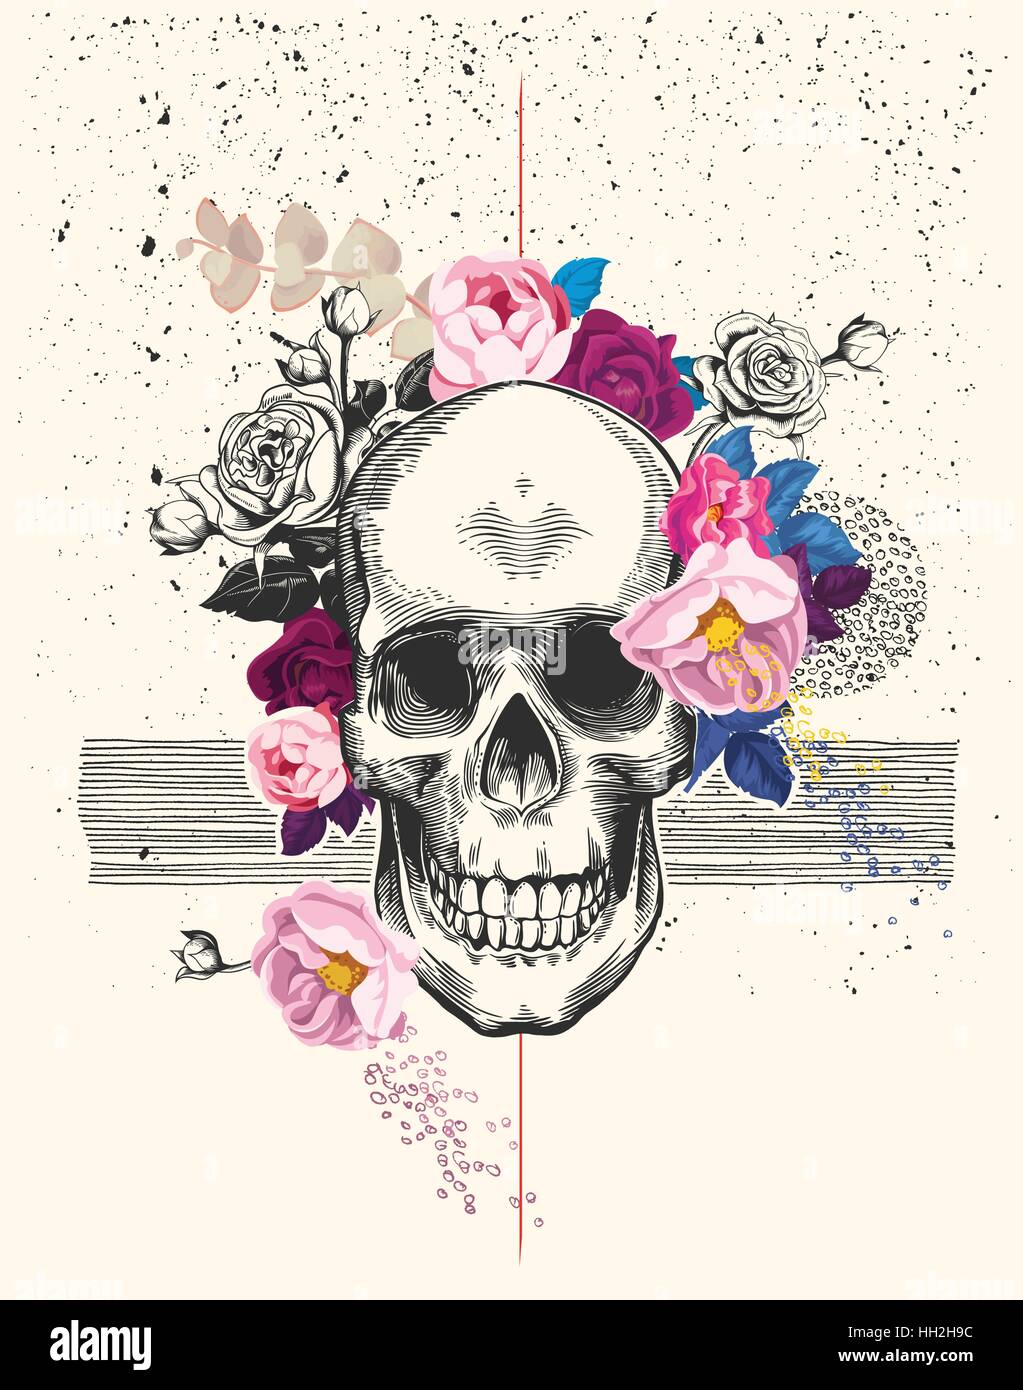 Naturalistic human skull drawn in etching style and surrounded by rose flowers with black ink spatter and lines on background. Trendy vector illustration for postcard, flyer, t-shirt print, poster Stock Vector